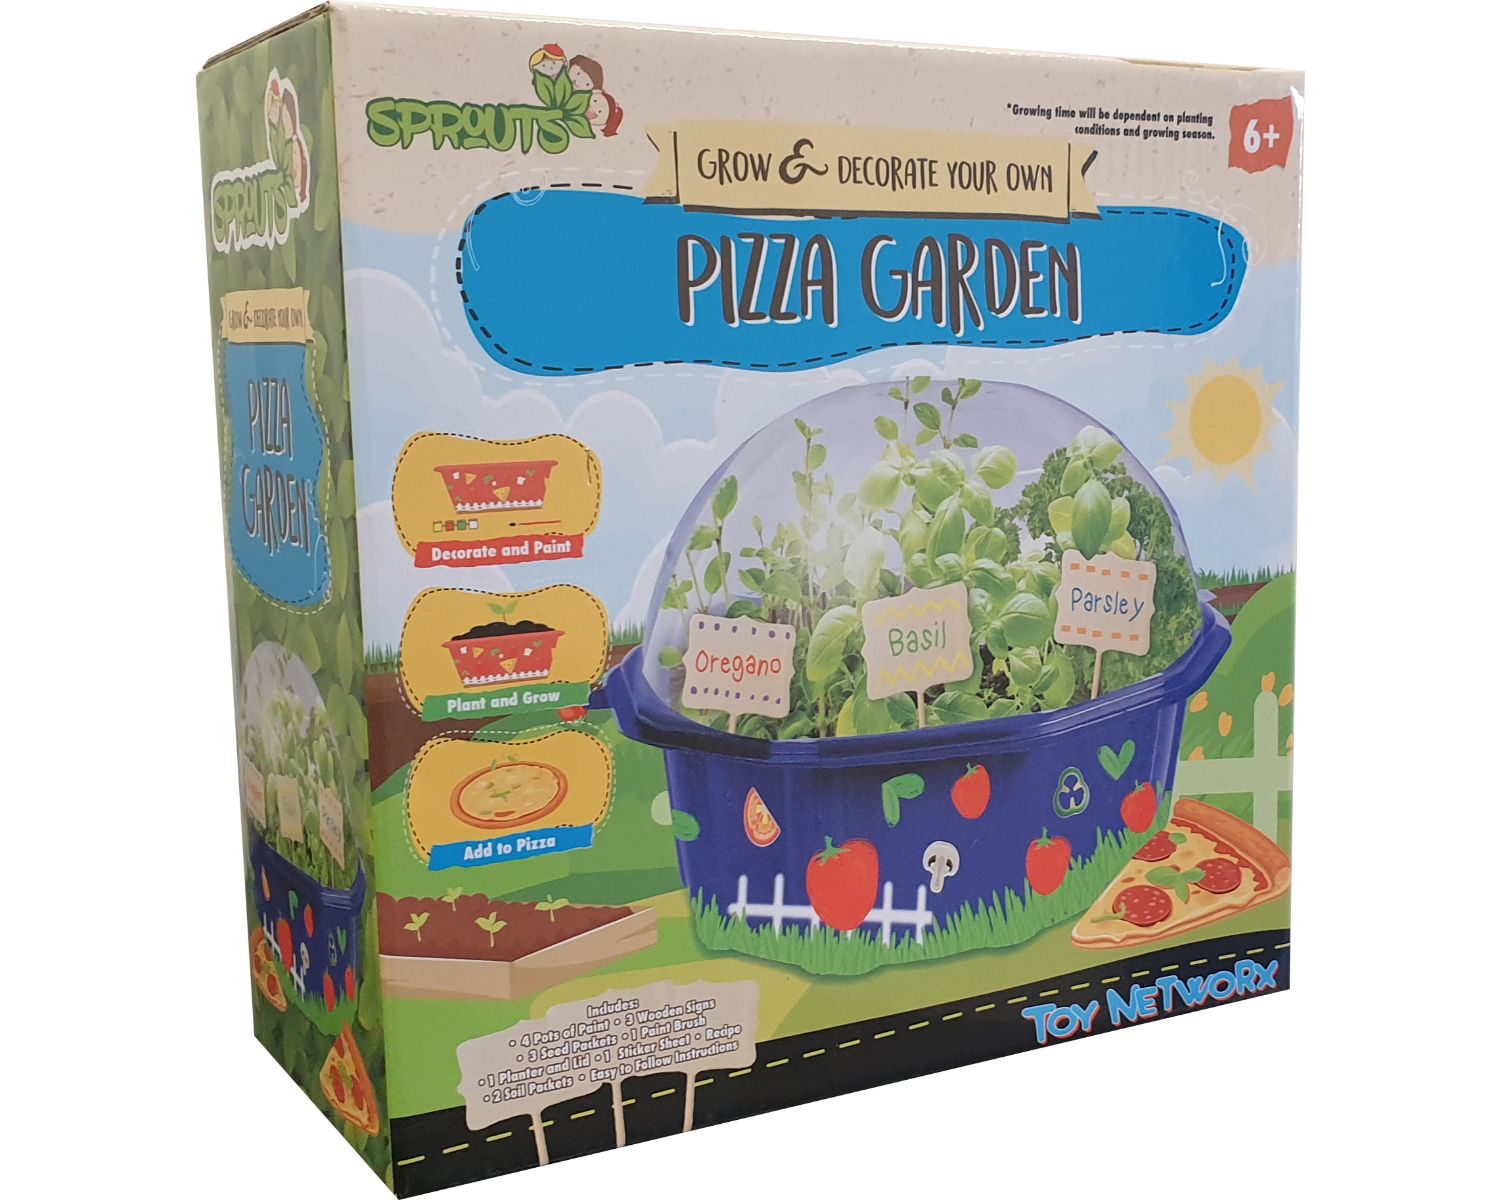 Creative Sprouts Grow & Decorate Pizza Garden